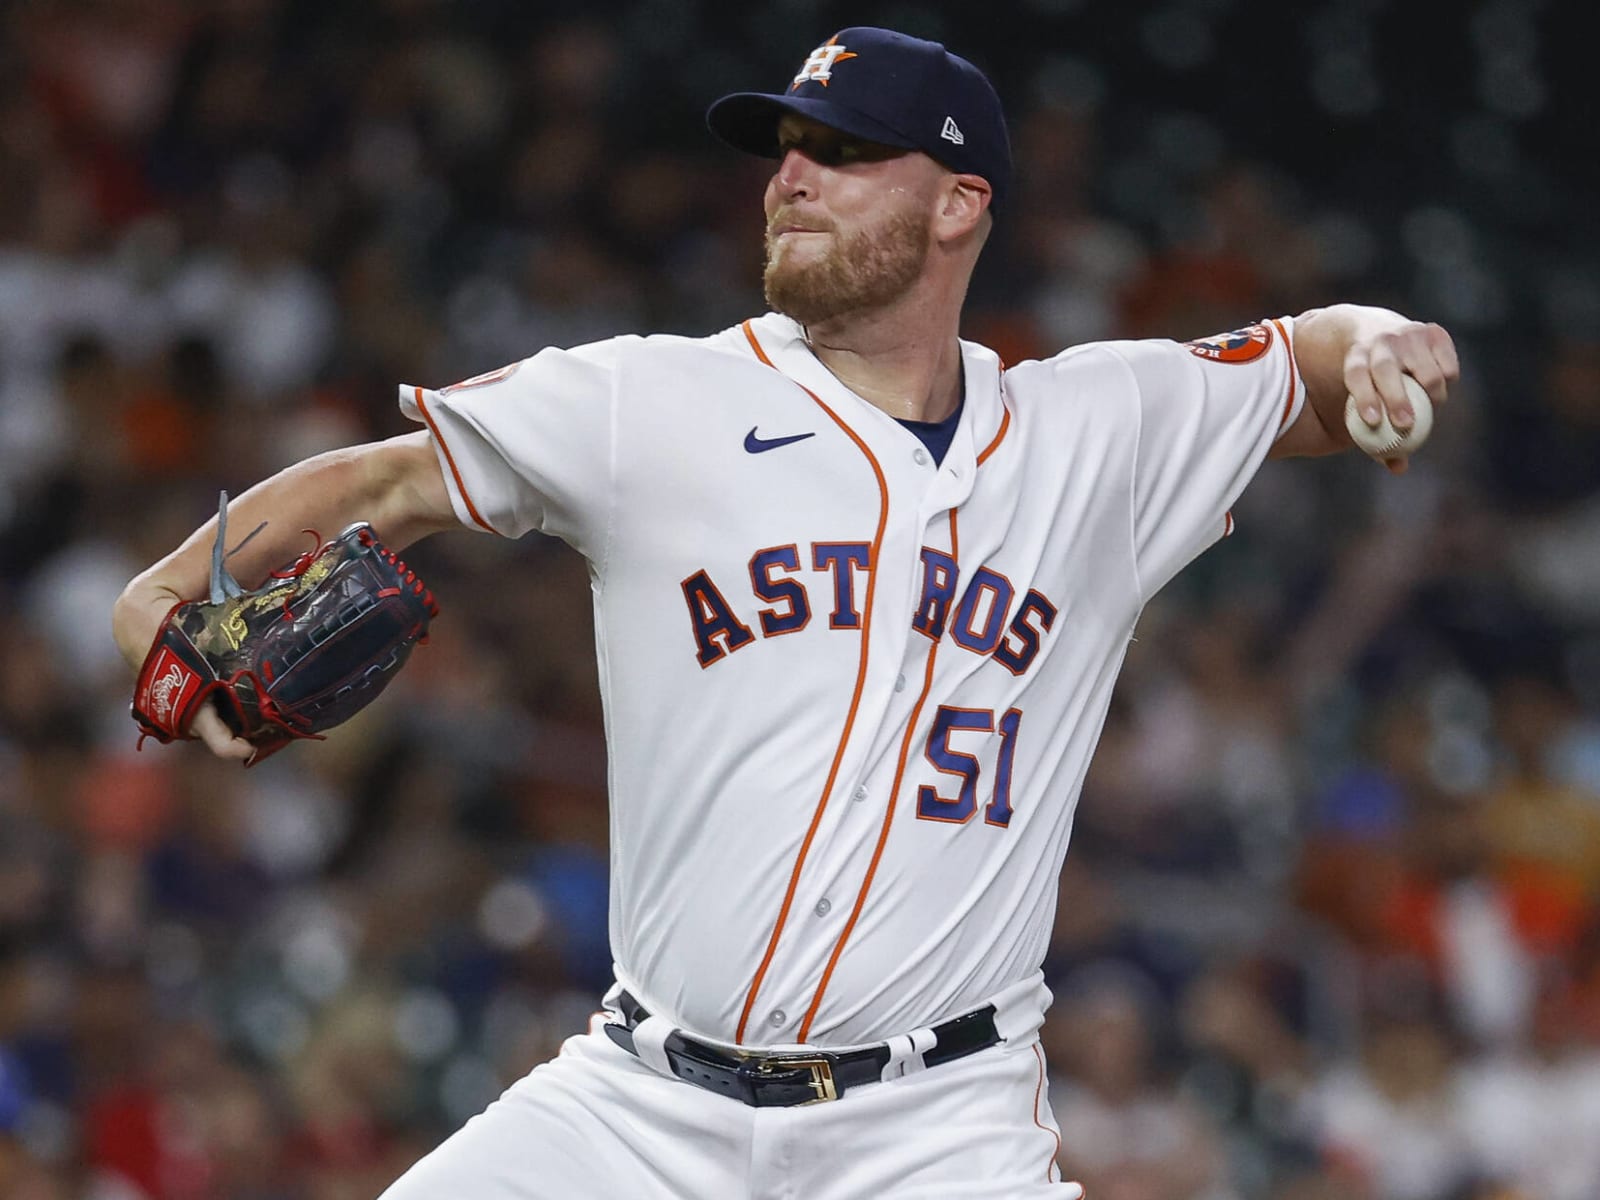 World Series Game 3: Dodgers at Astros, lineups, starting pitchers